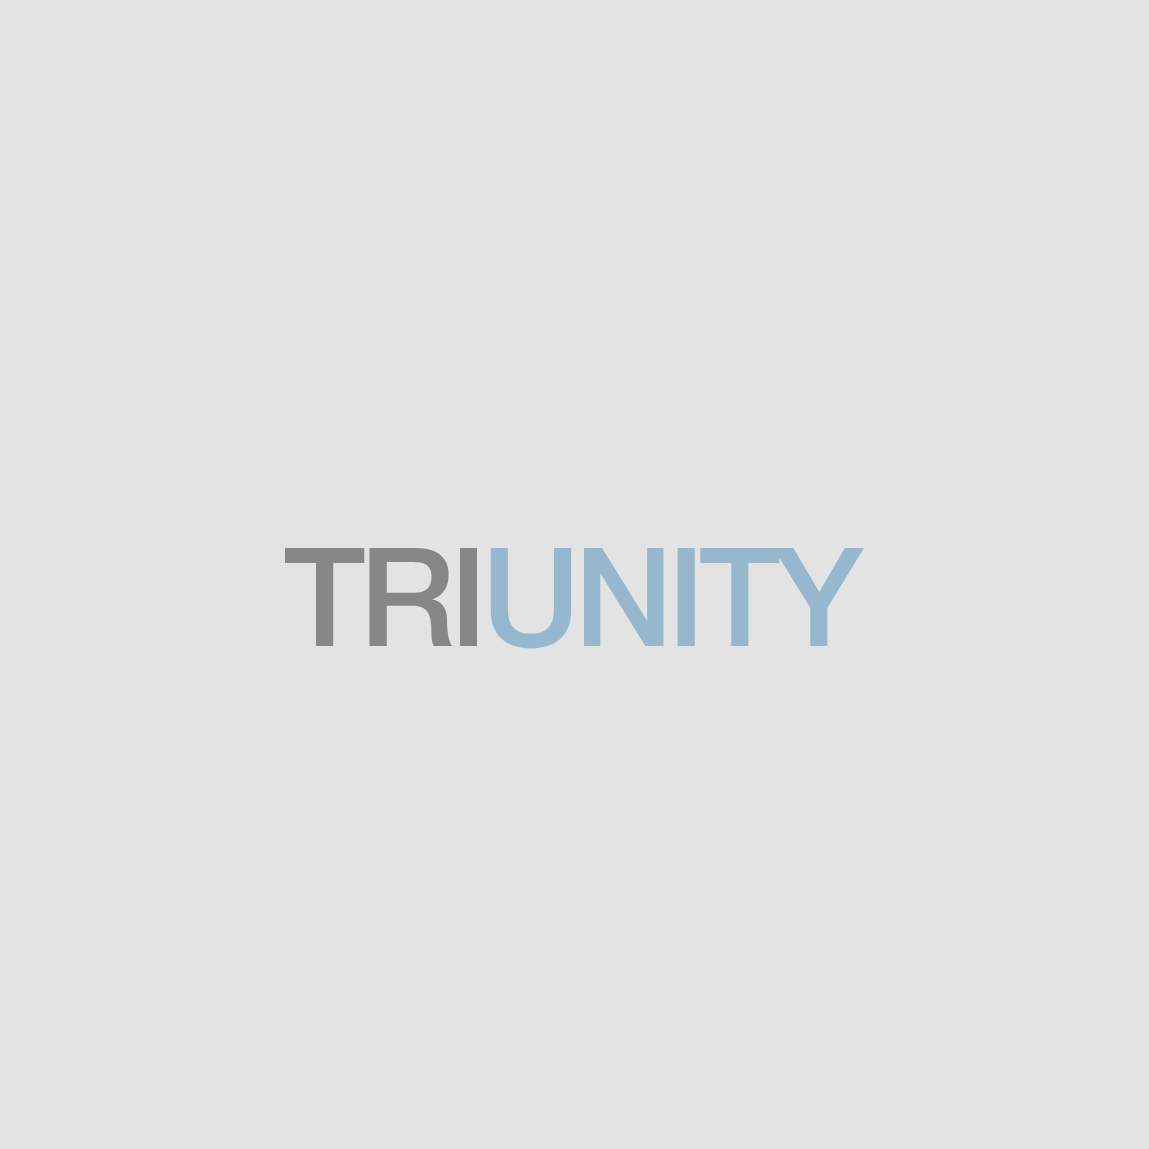 triunity-placeholder-light